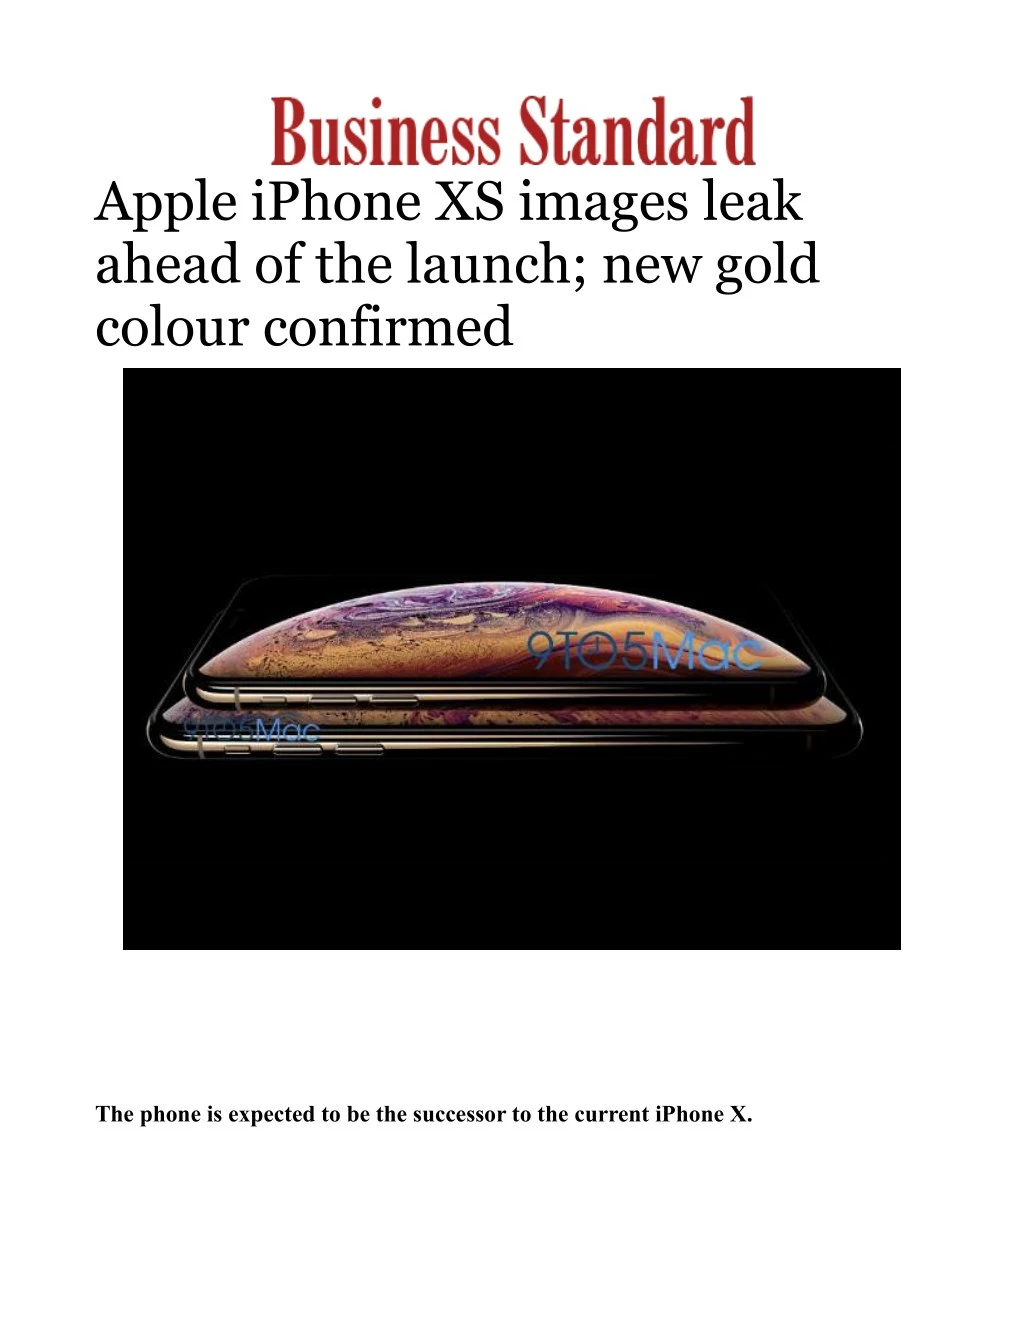 apple iphone xs images leak ahead of the launch